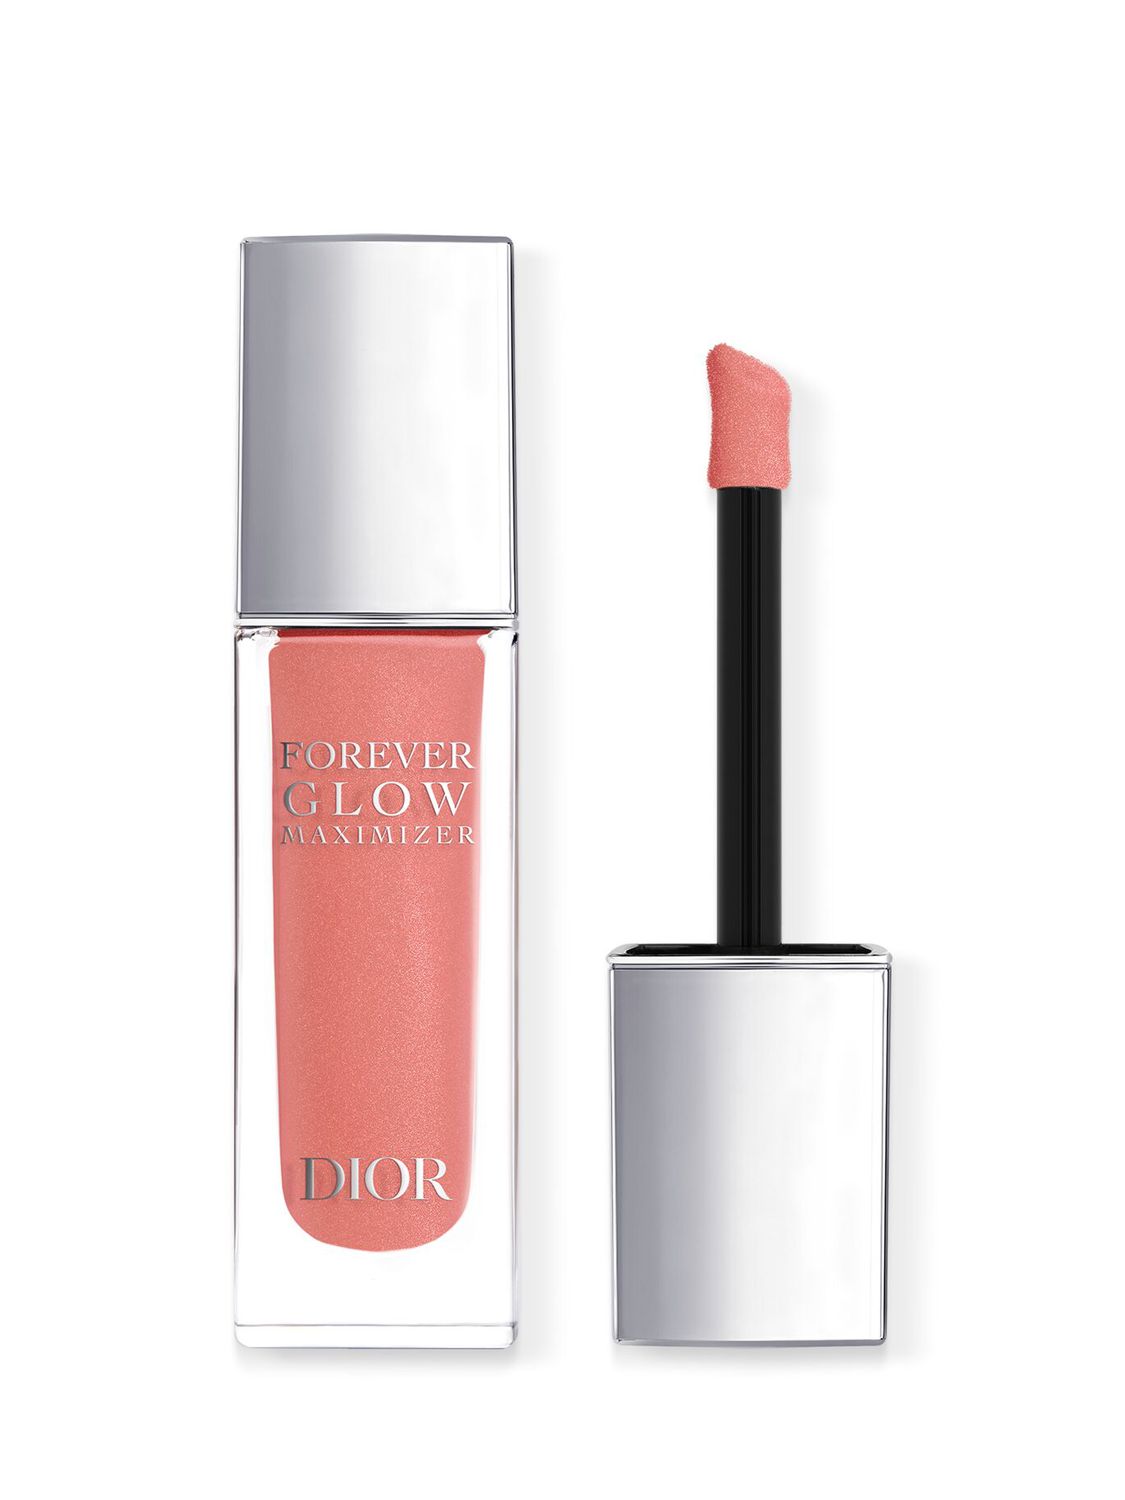 DIOR Forever Glow Maximizer, 014 Rosy 1